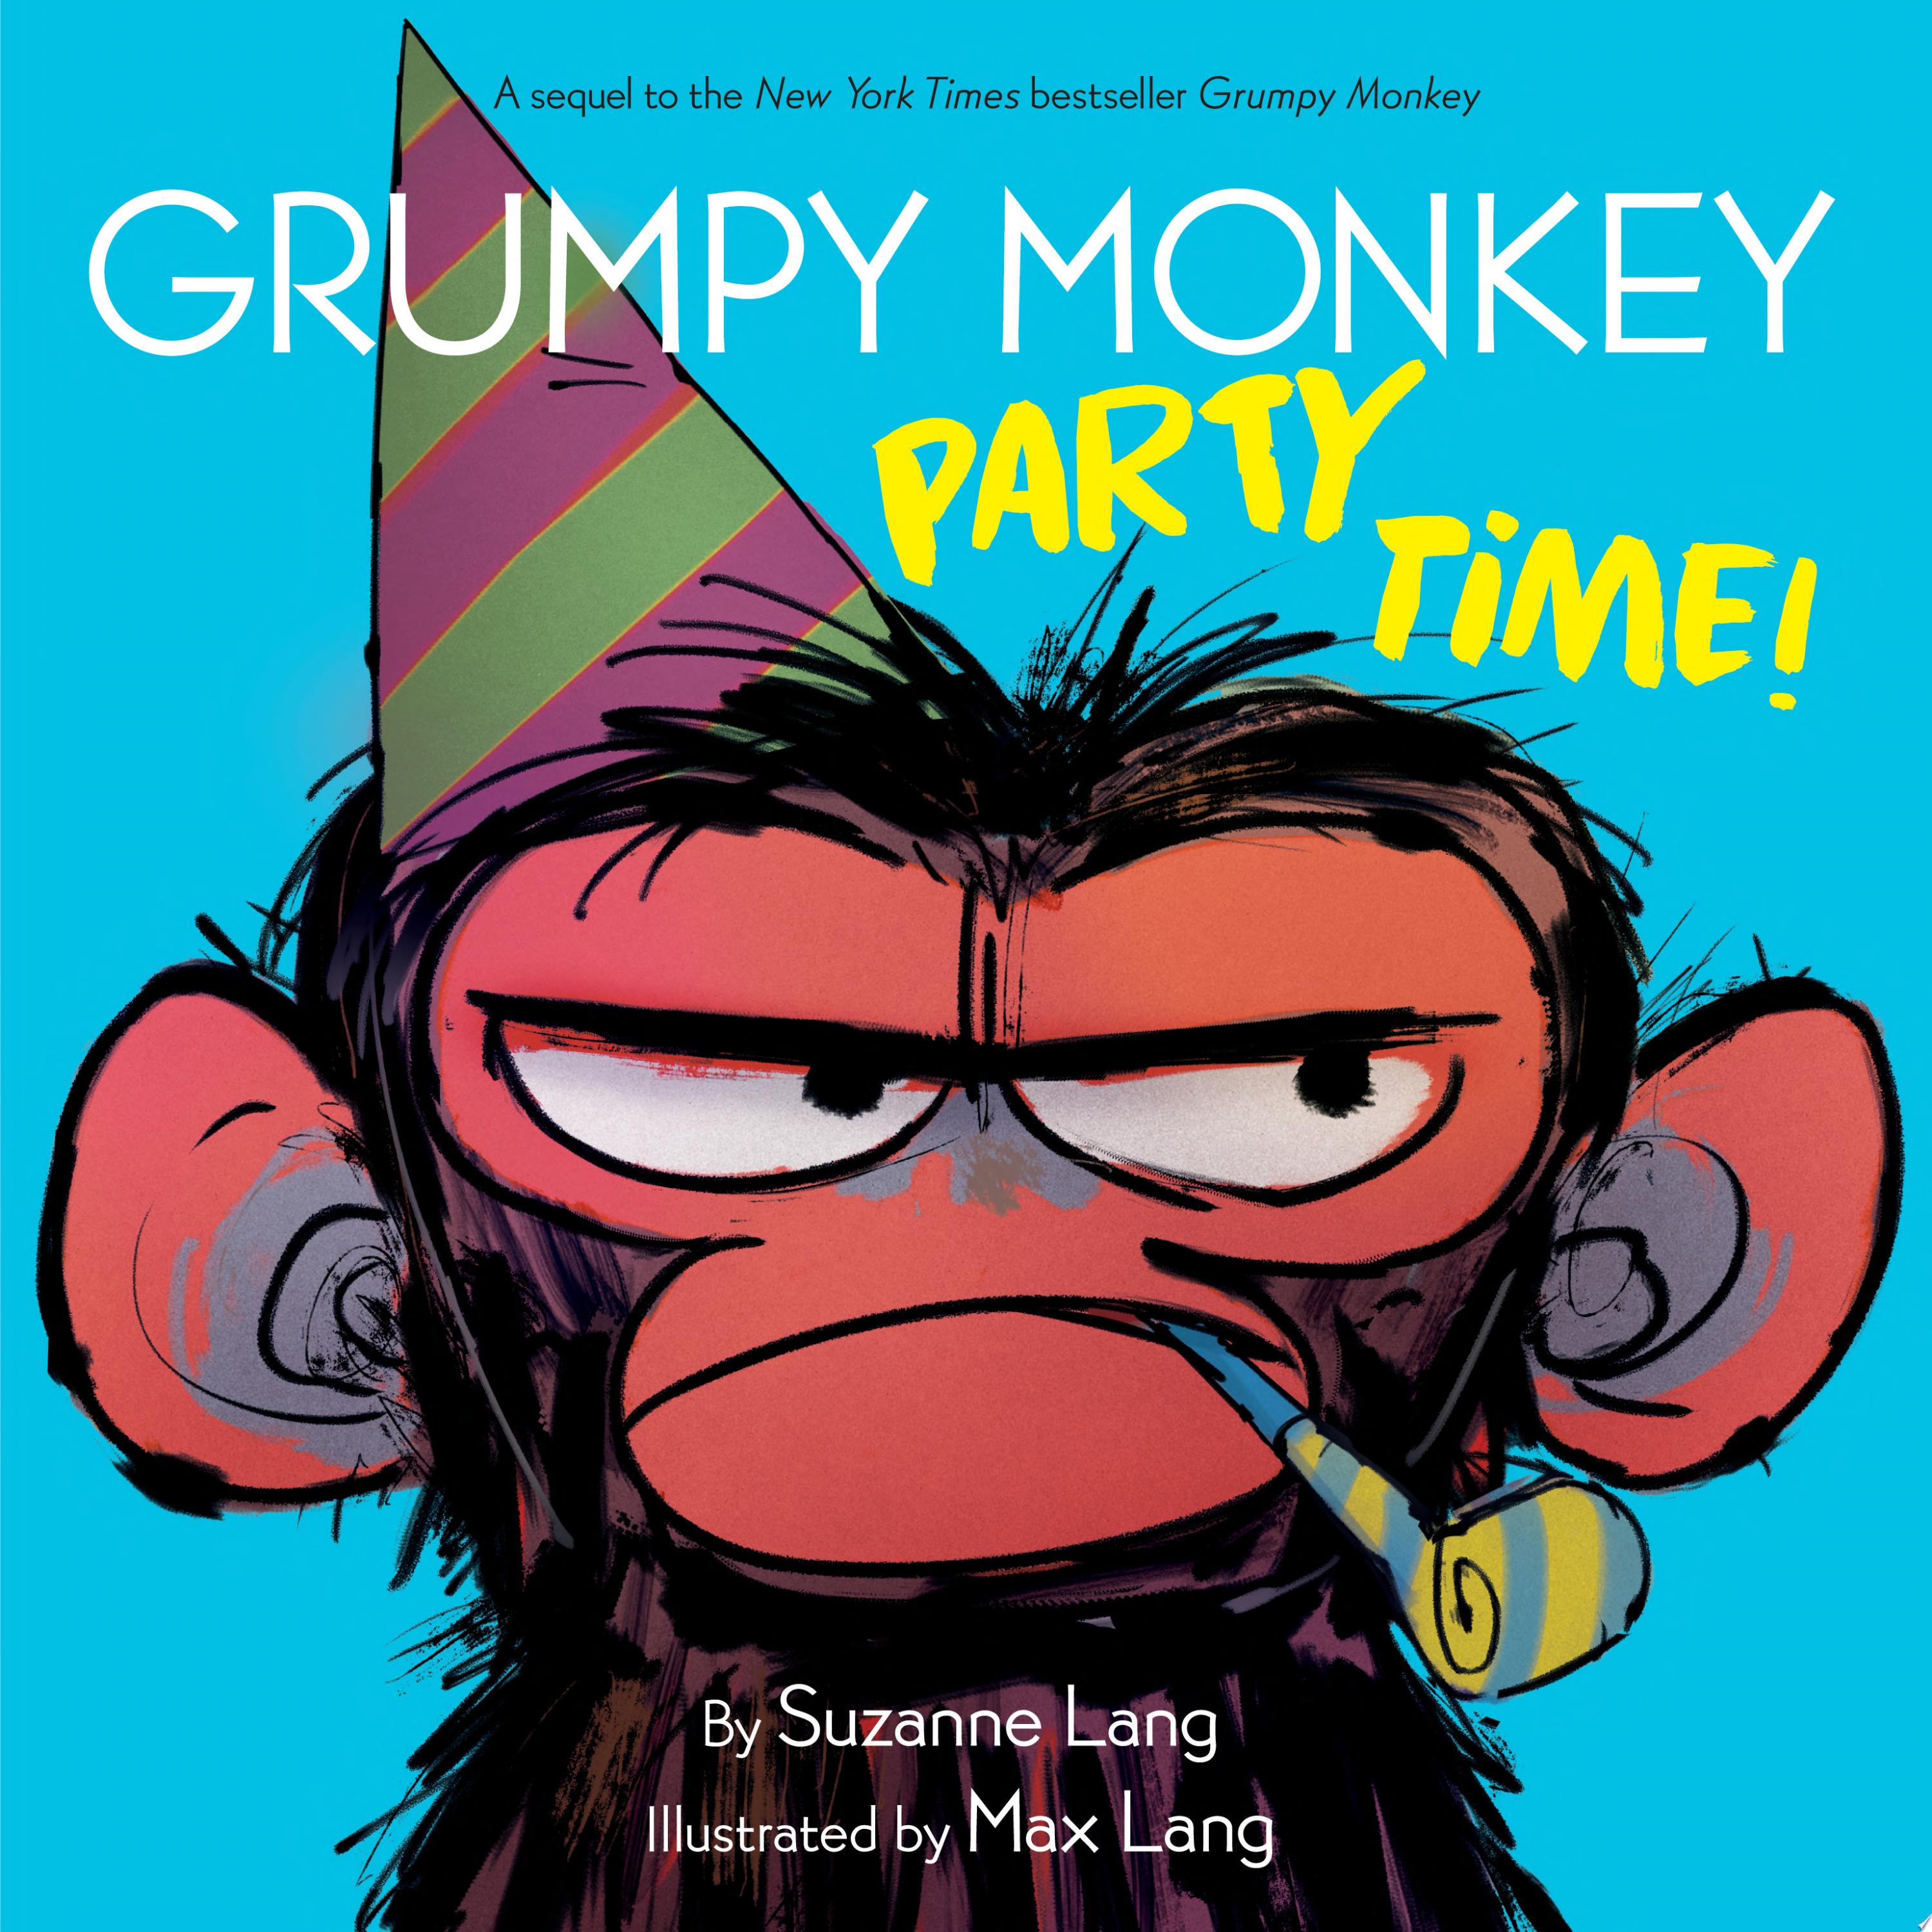 Image for "Grumpy Monkey Party Time!"